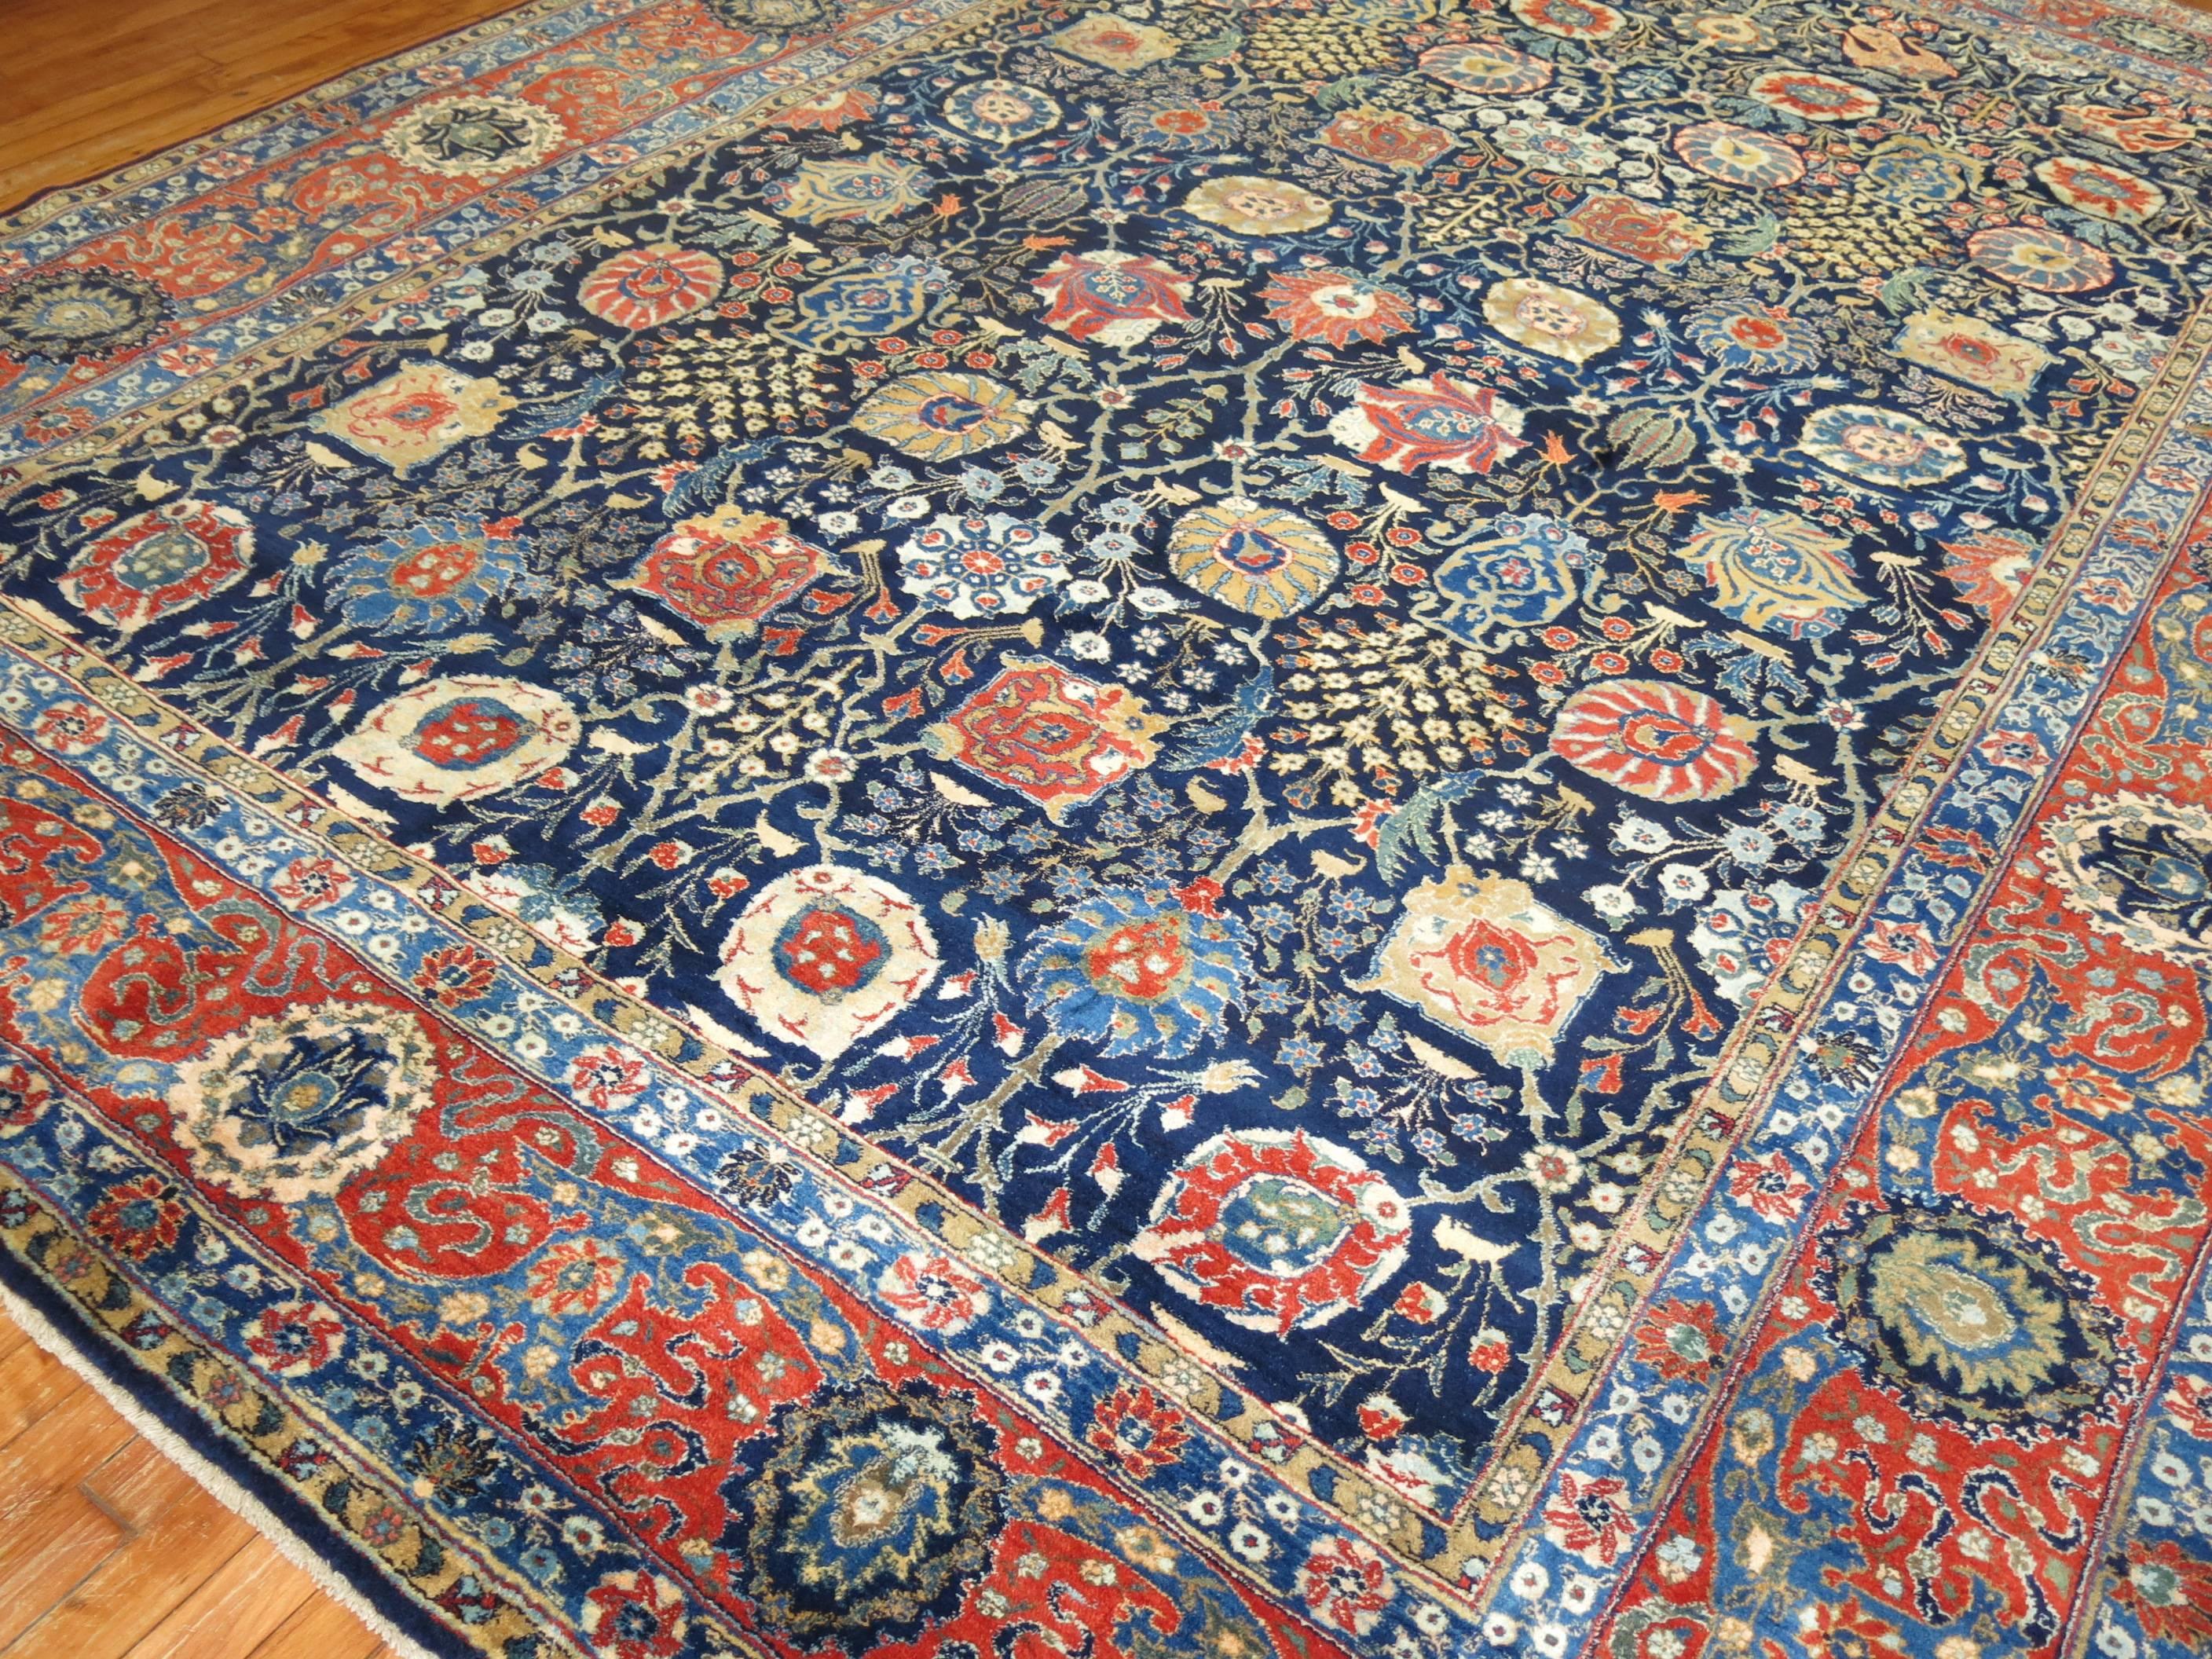 Full pile Persian Tabriz carpet featuring a pristine all-over design navy blue field. Purchased from a private estate in Manhattan, the previous owner kept this rug in their home library and kept in perfect shape.